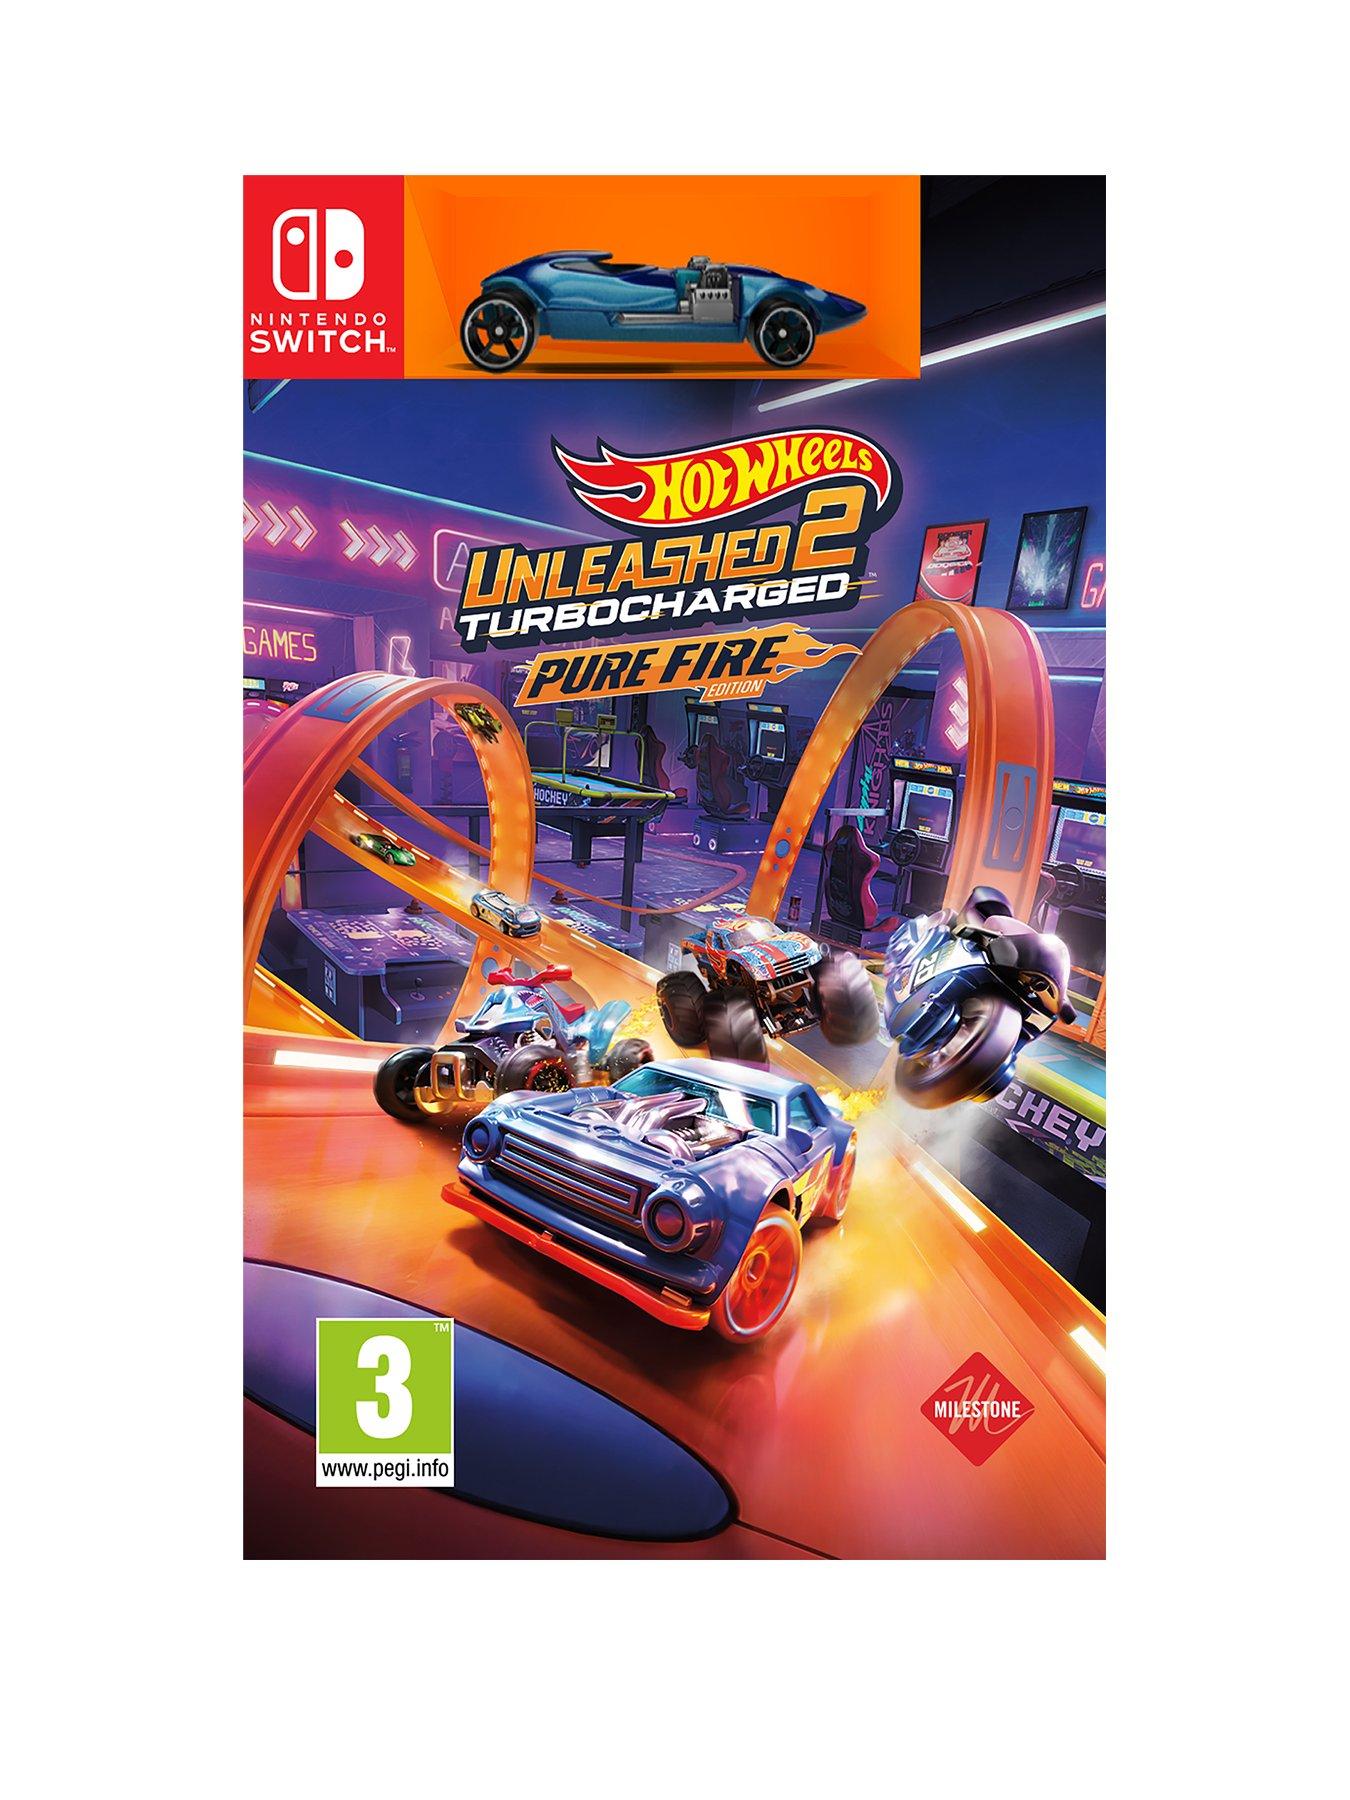 Hot Wheels Unleashed Switch review for Nintendo Switch